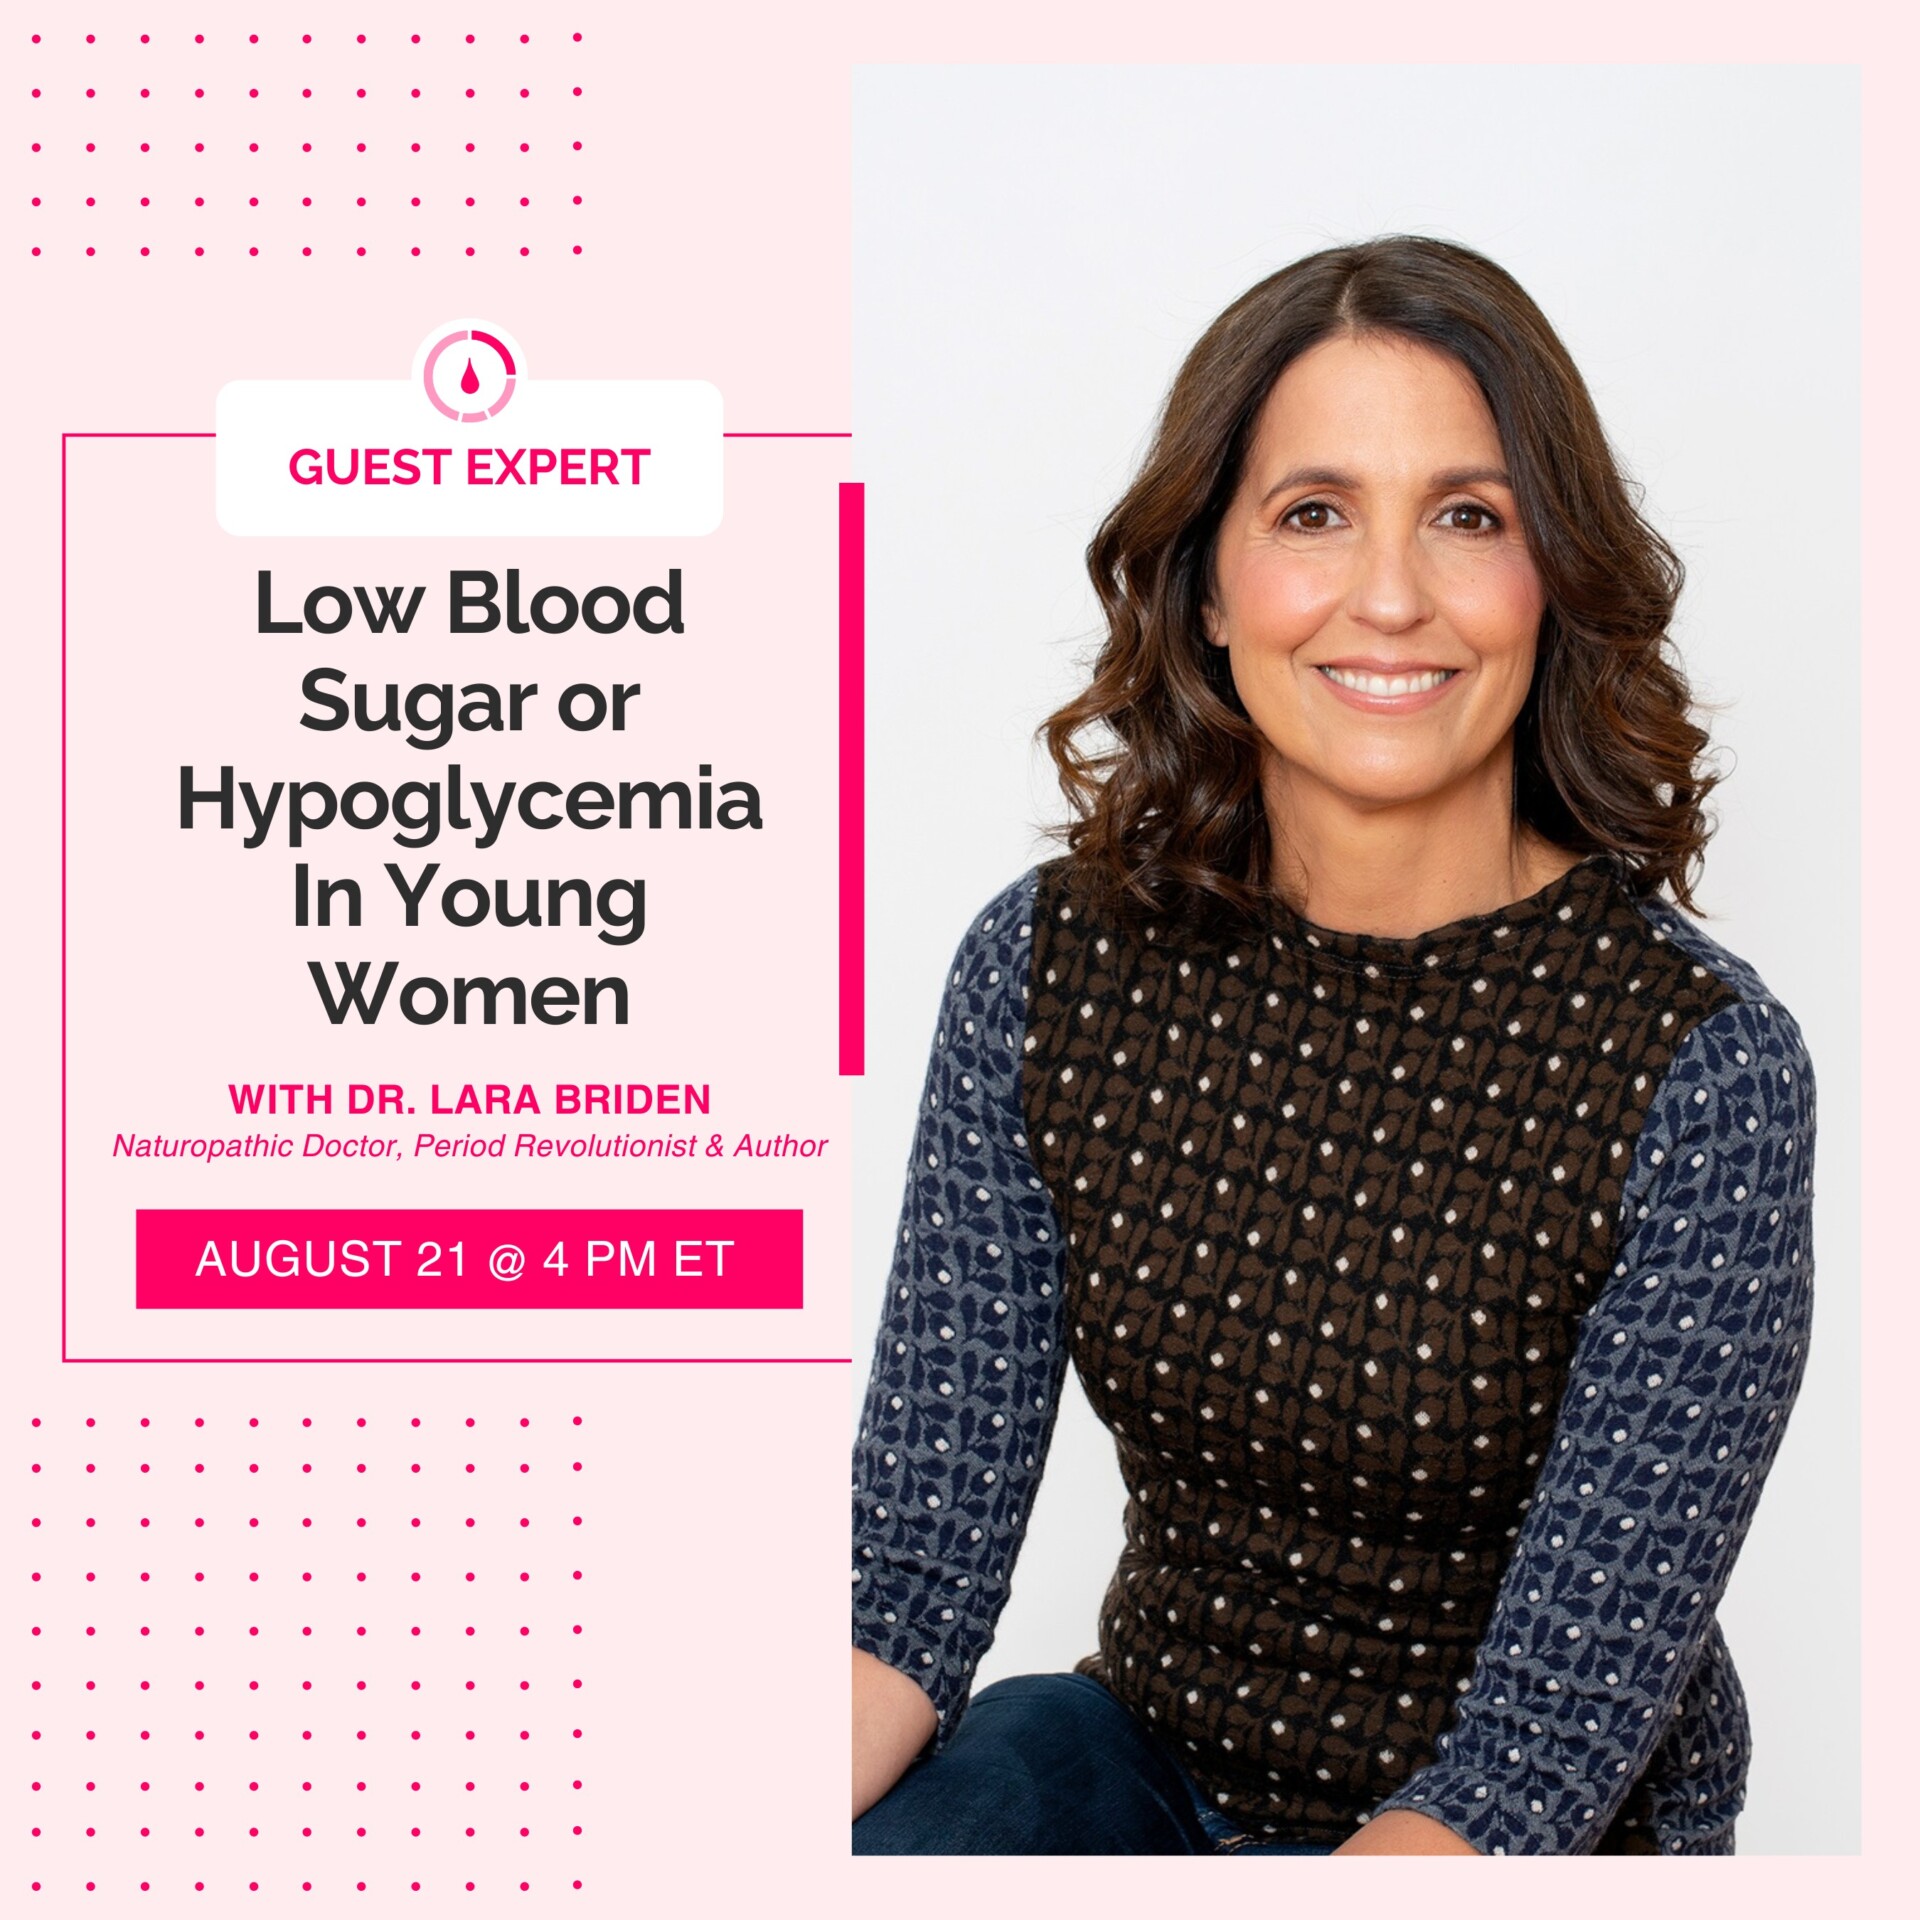 Low Blood Sugar Or Hypoglycemia In Young Women With Dr. Lara Briden